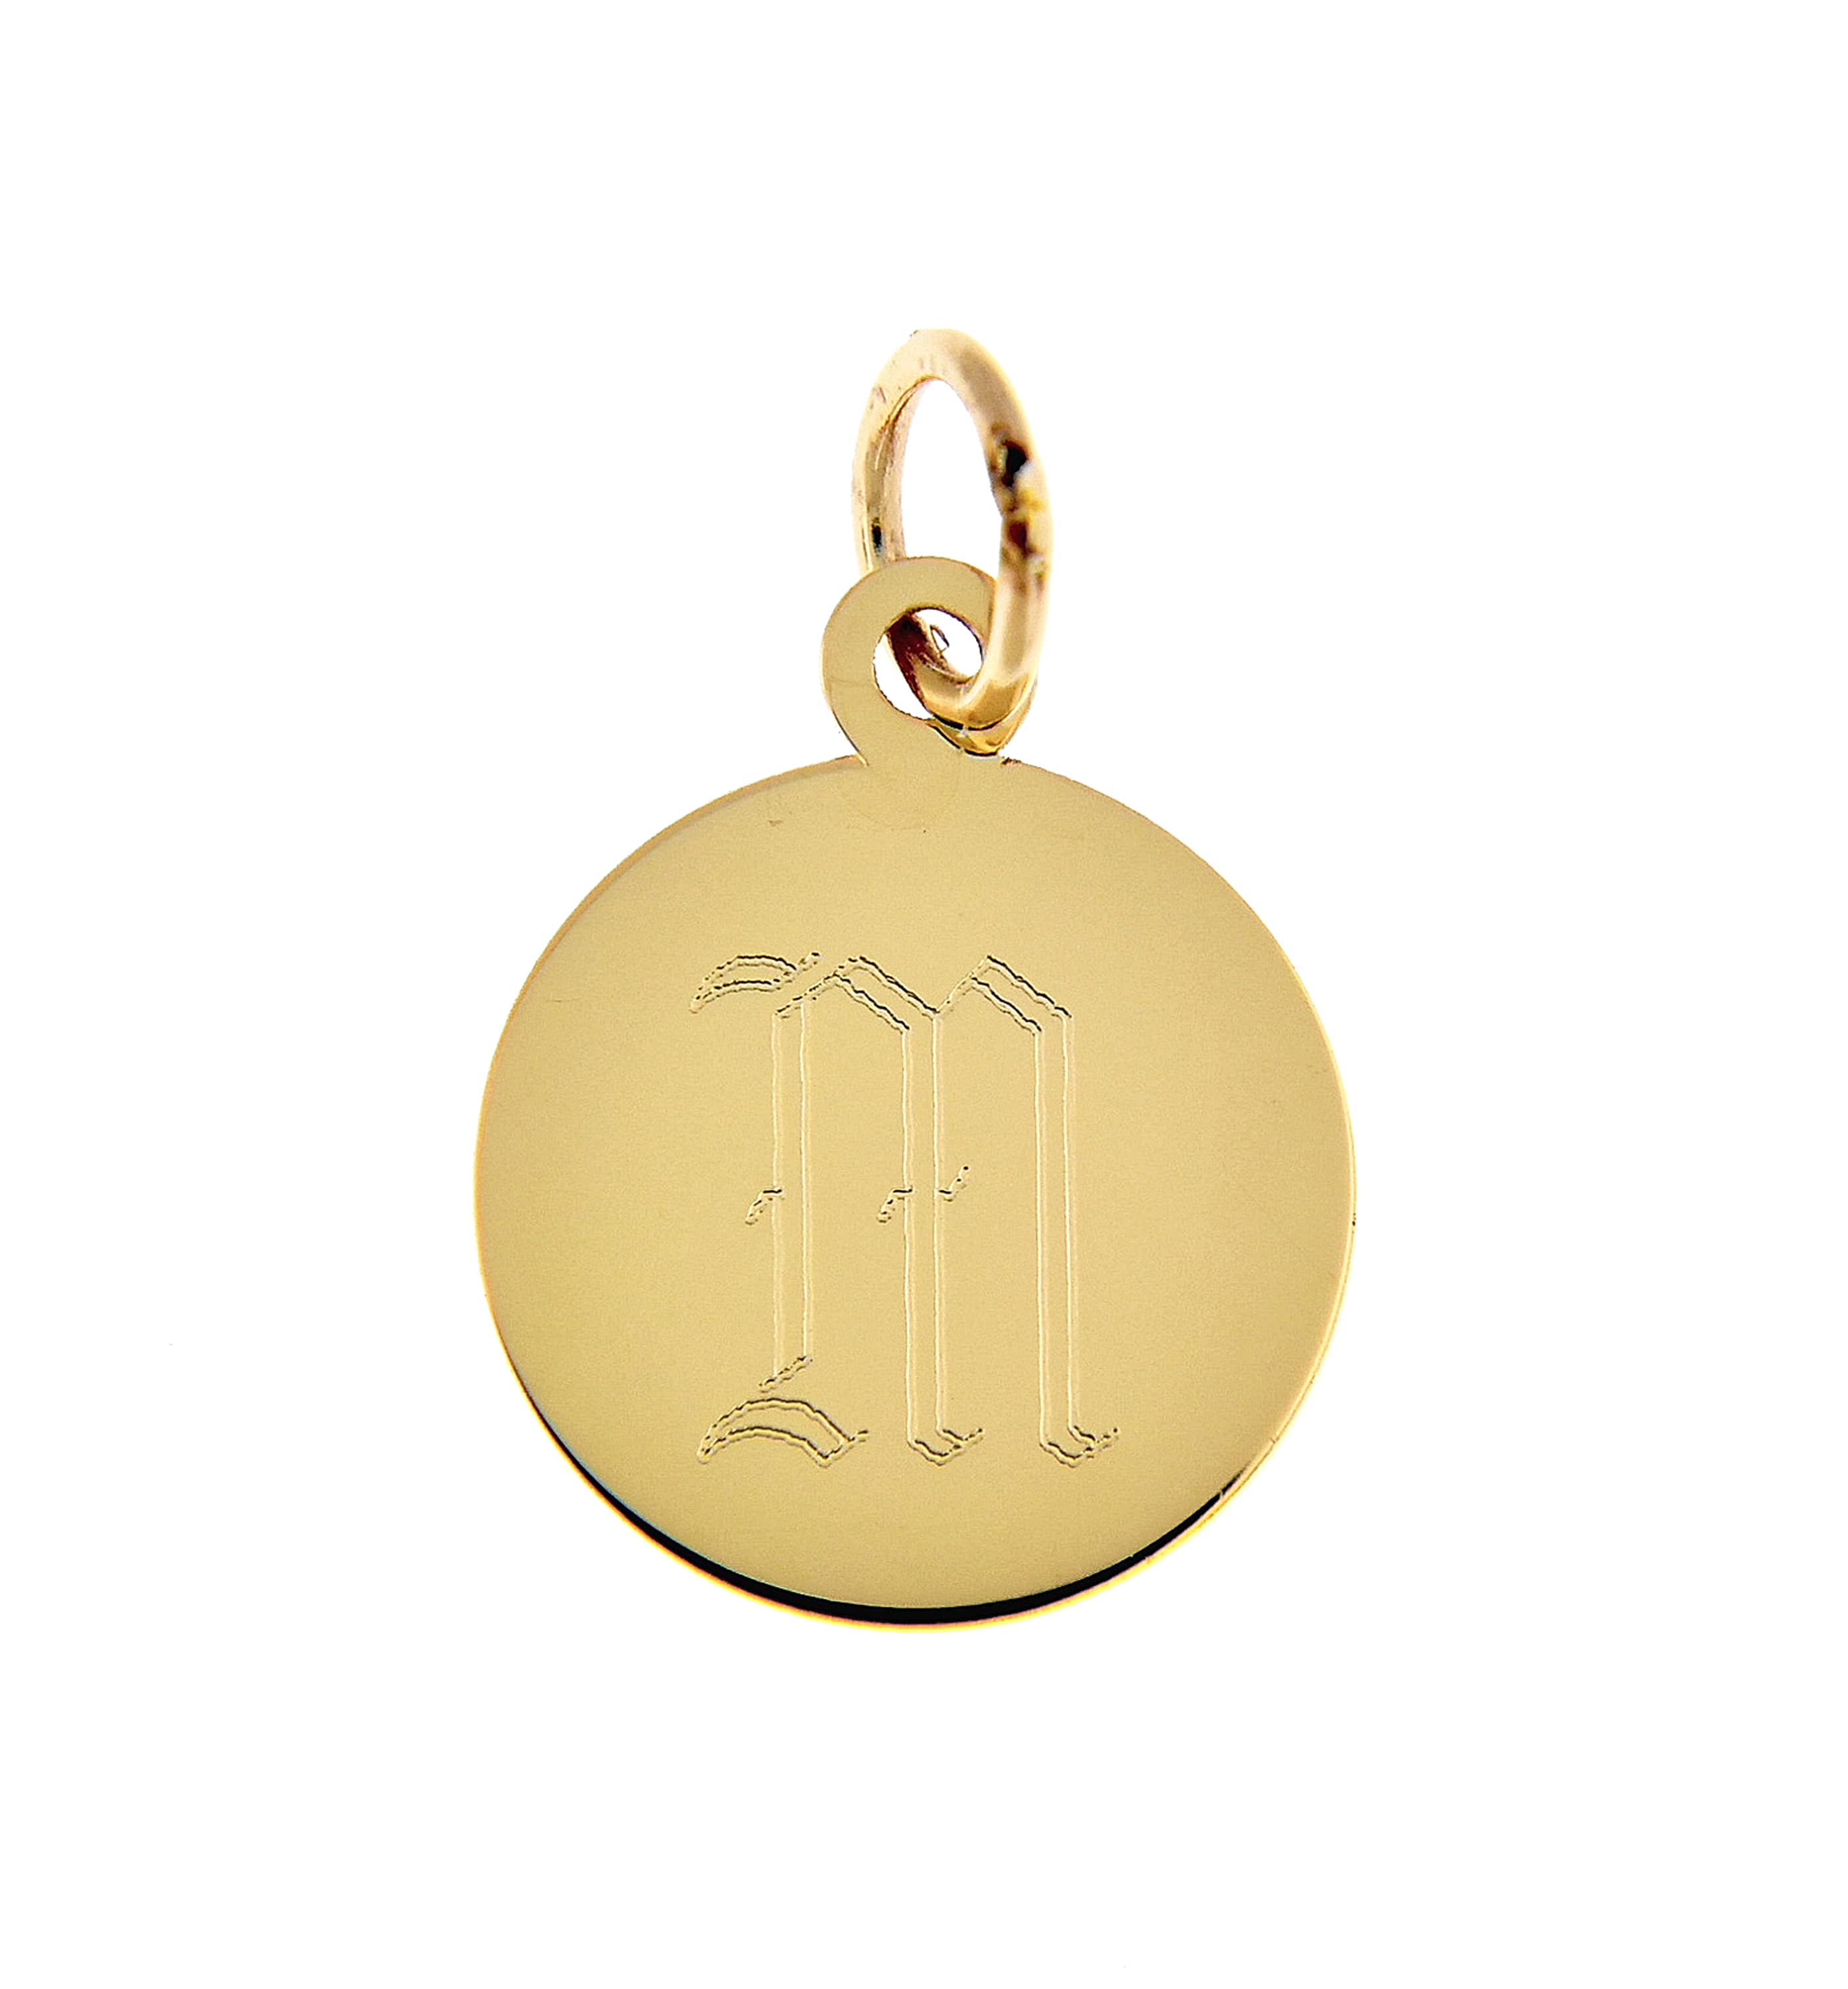 10k Yellow Gold 15mm Round Circle Disc Pendant Charm Personalized Engraved Monogram